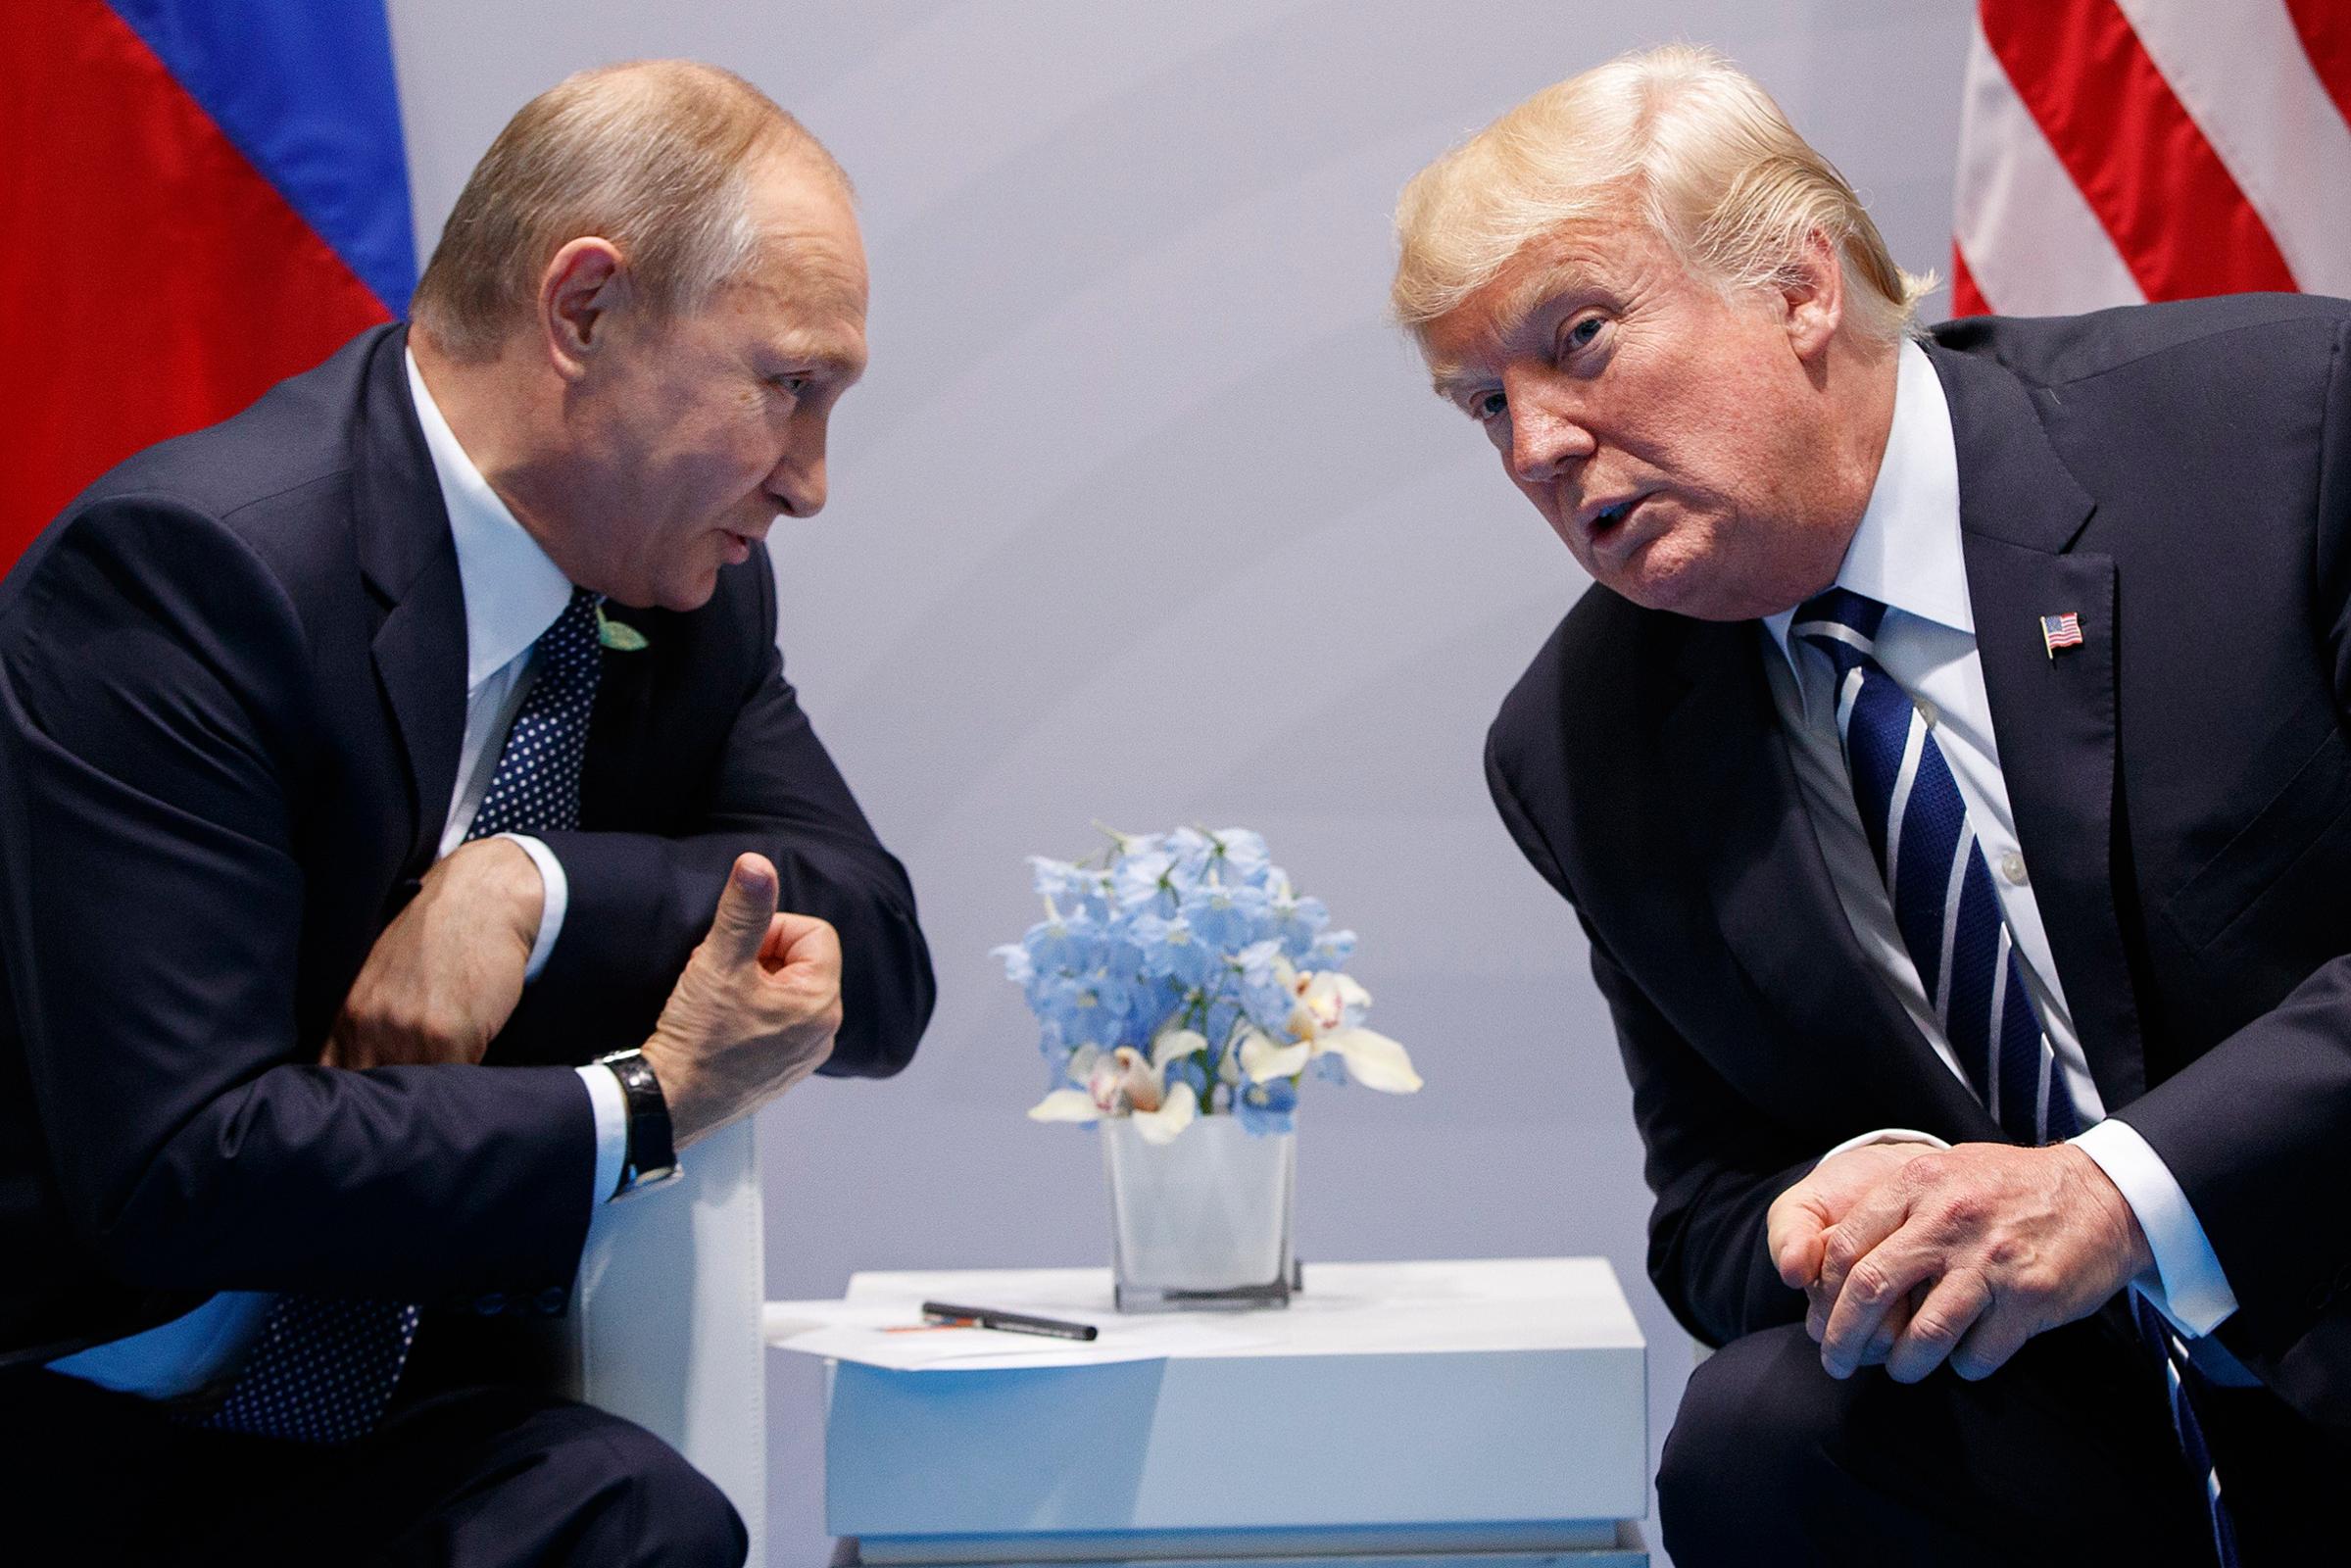 President Trump met with Putin not once but twice at the G-20 summit in Hamburg in July. The undisclosed second conversation took place during a dinner and without any other U.S. officials present.